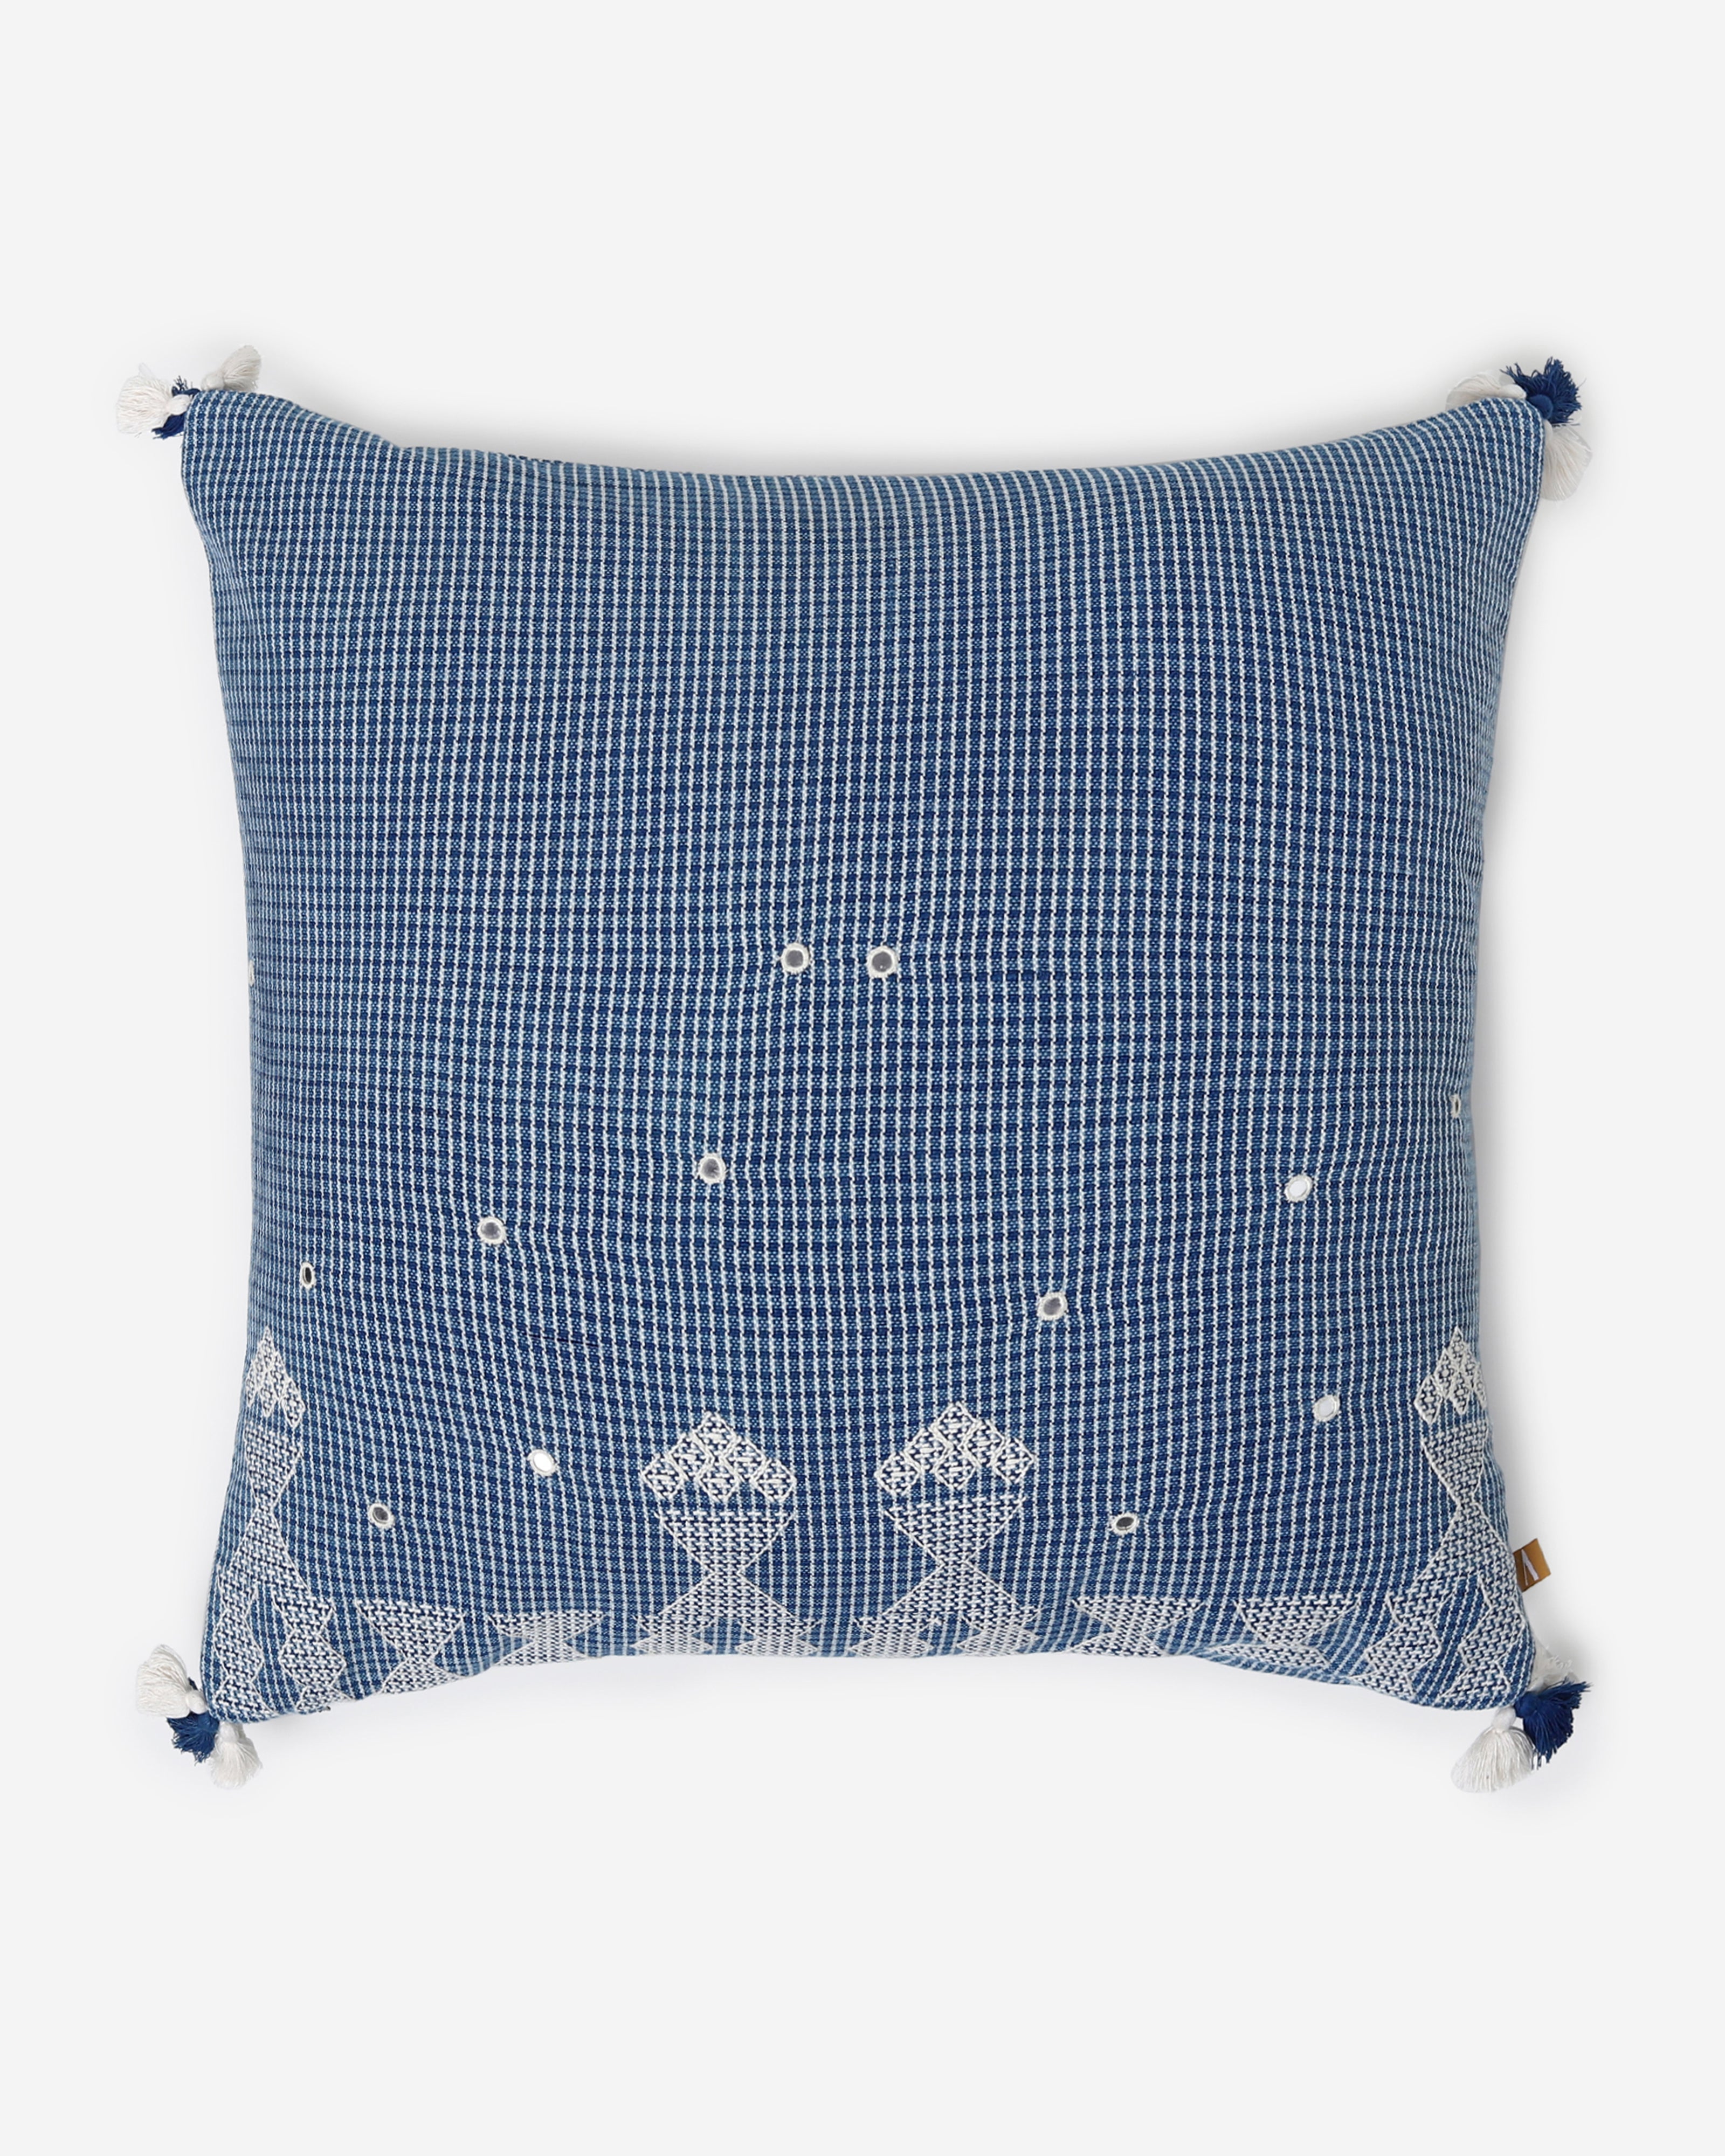 Jhilmil Extra Weft Cotton Cushion Cover - Light Blue